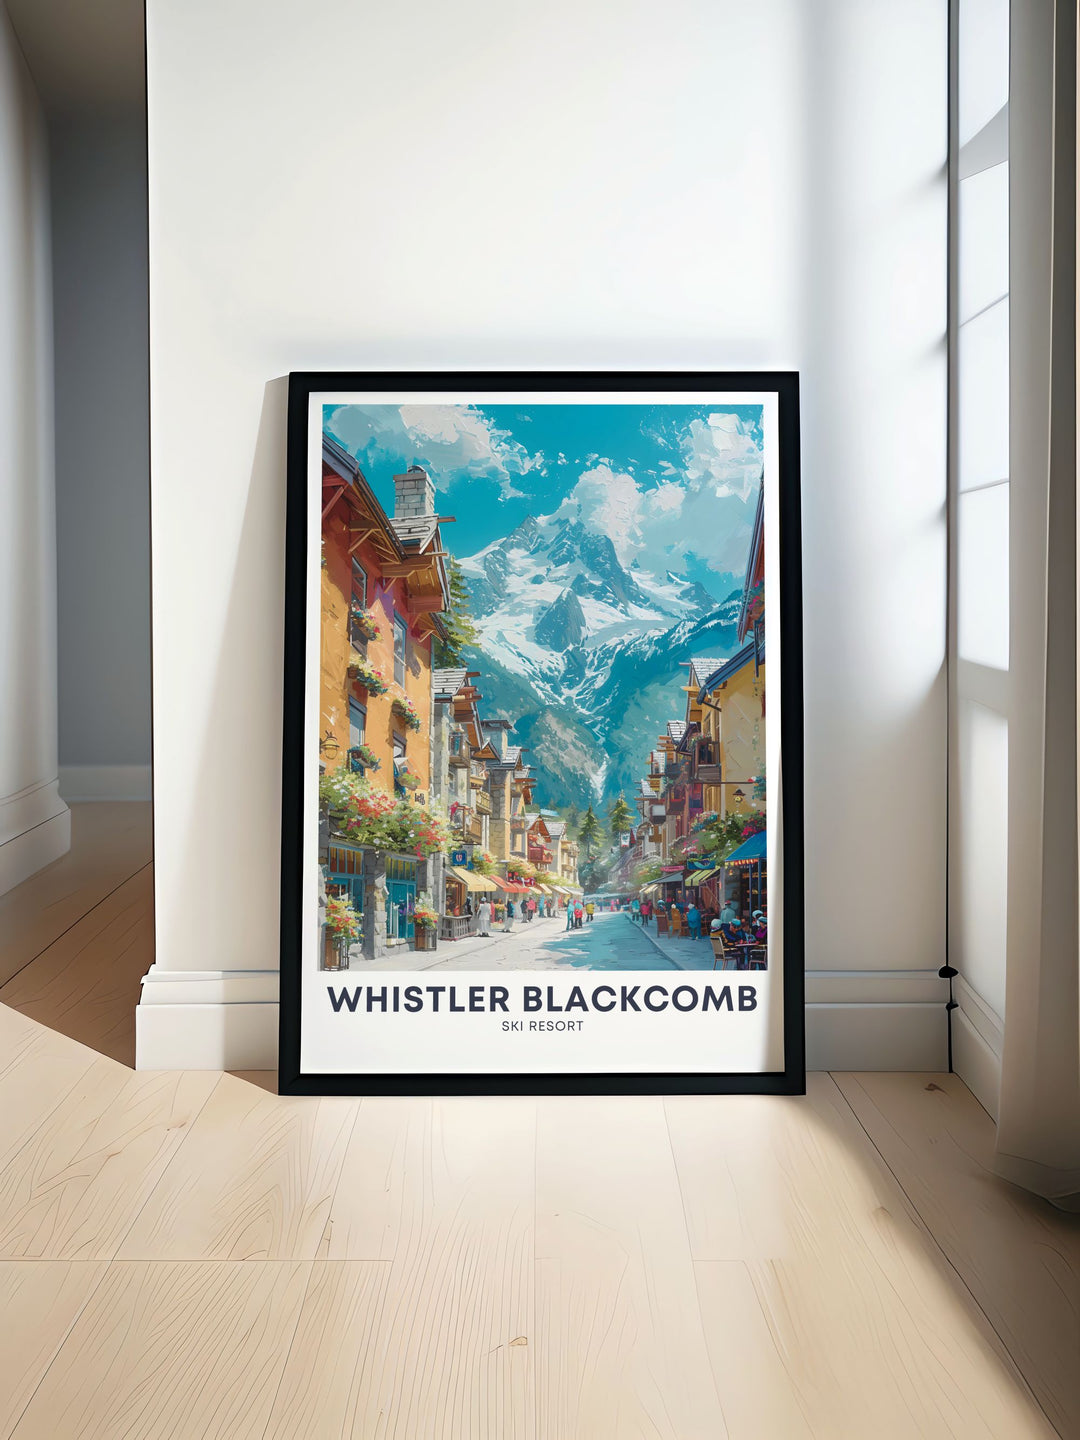 Whistler village travel poster showcasing the vibrant life and stunning scenery of Whistler Blackcomb, perfect for anyone who loves Whistler Canada and wants to add beautiful skiing artwork to their home decor.